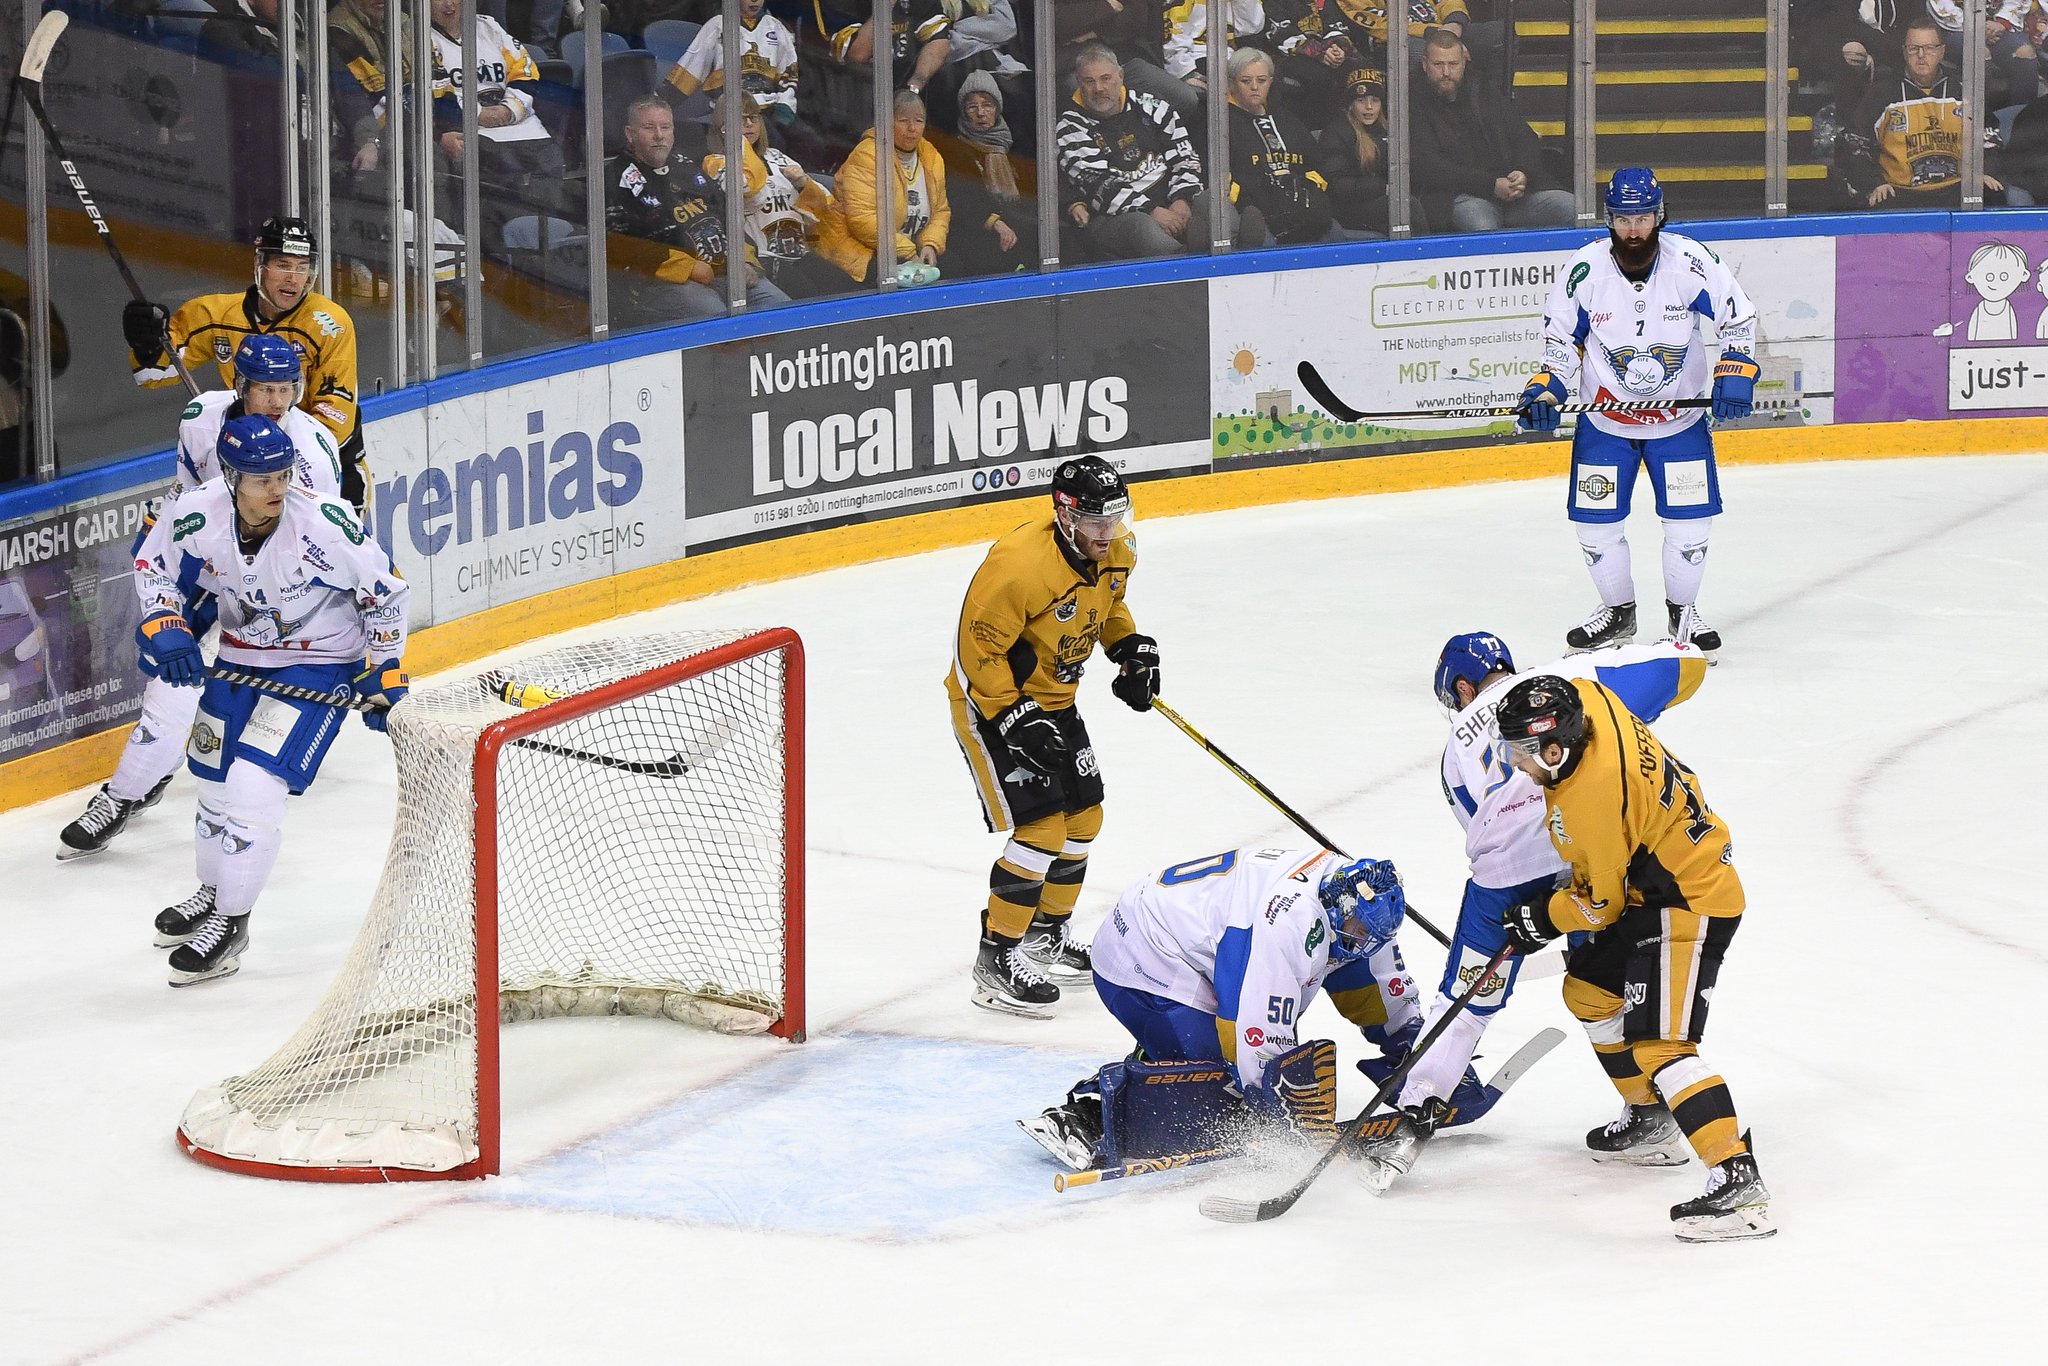 GAMEDAY IN NOTTINGHAM AS PANTHERS HOST FLYERS Top Image